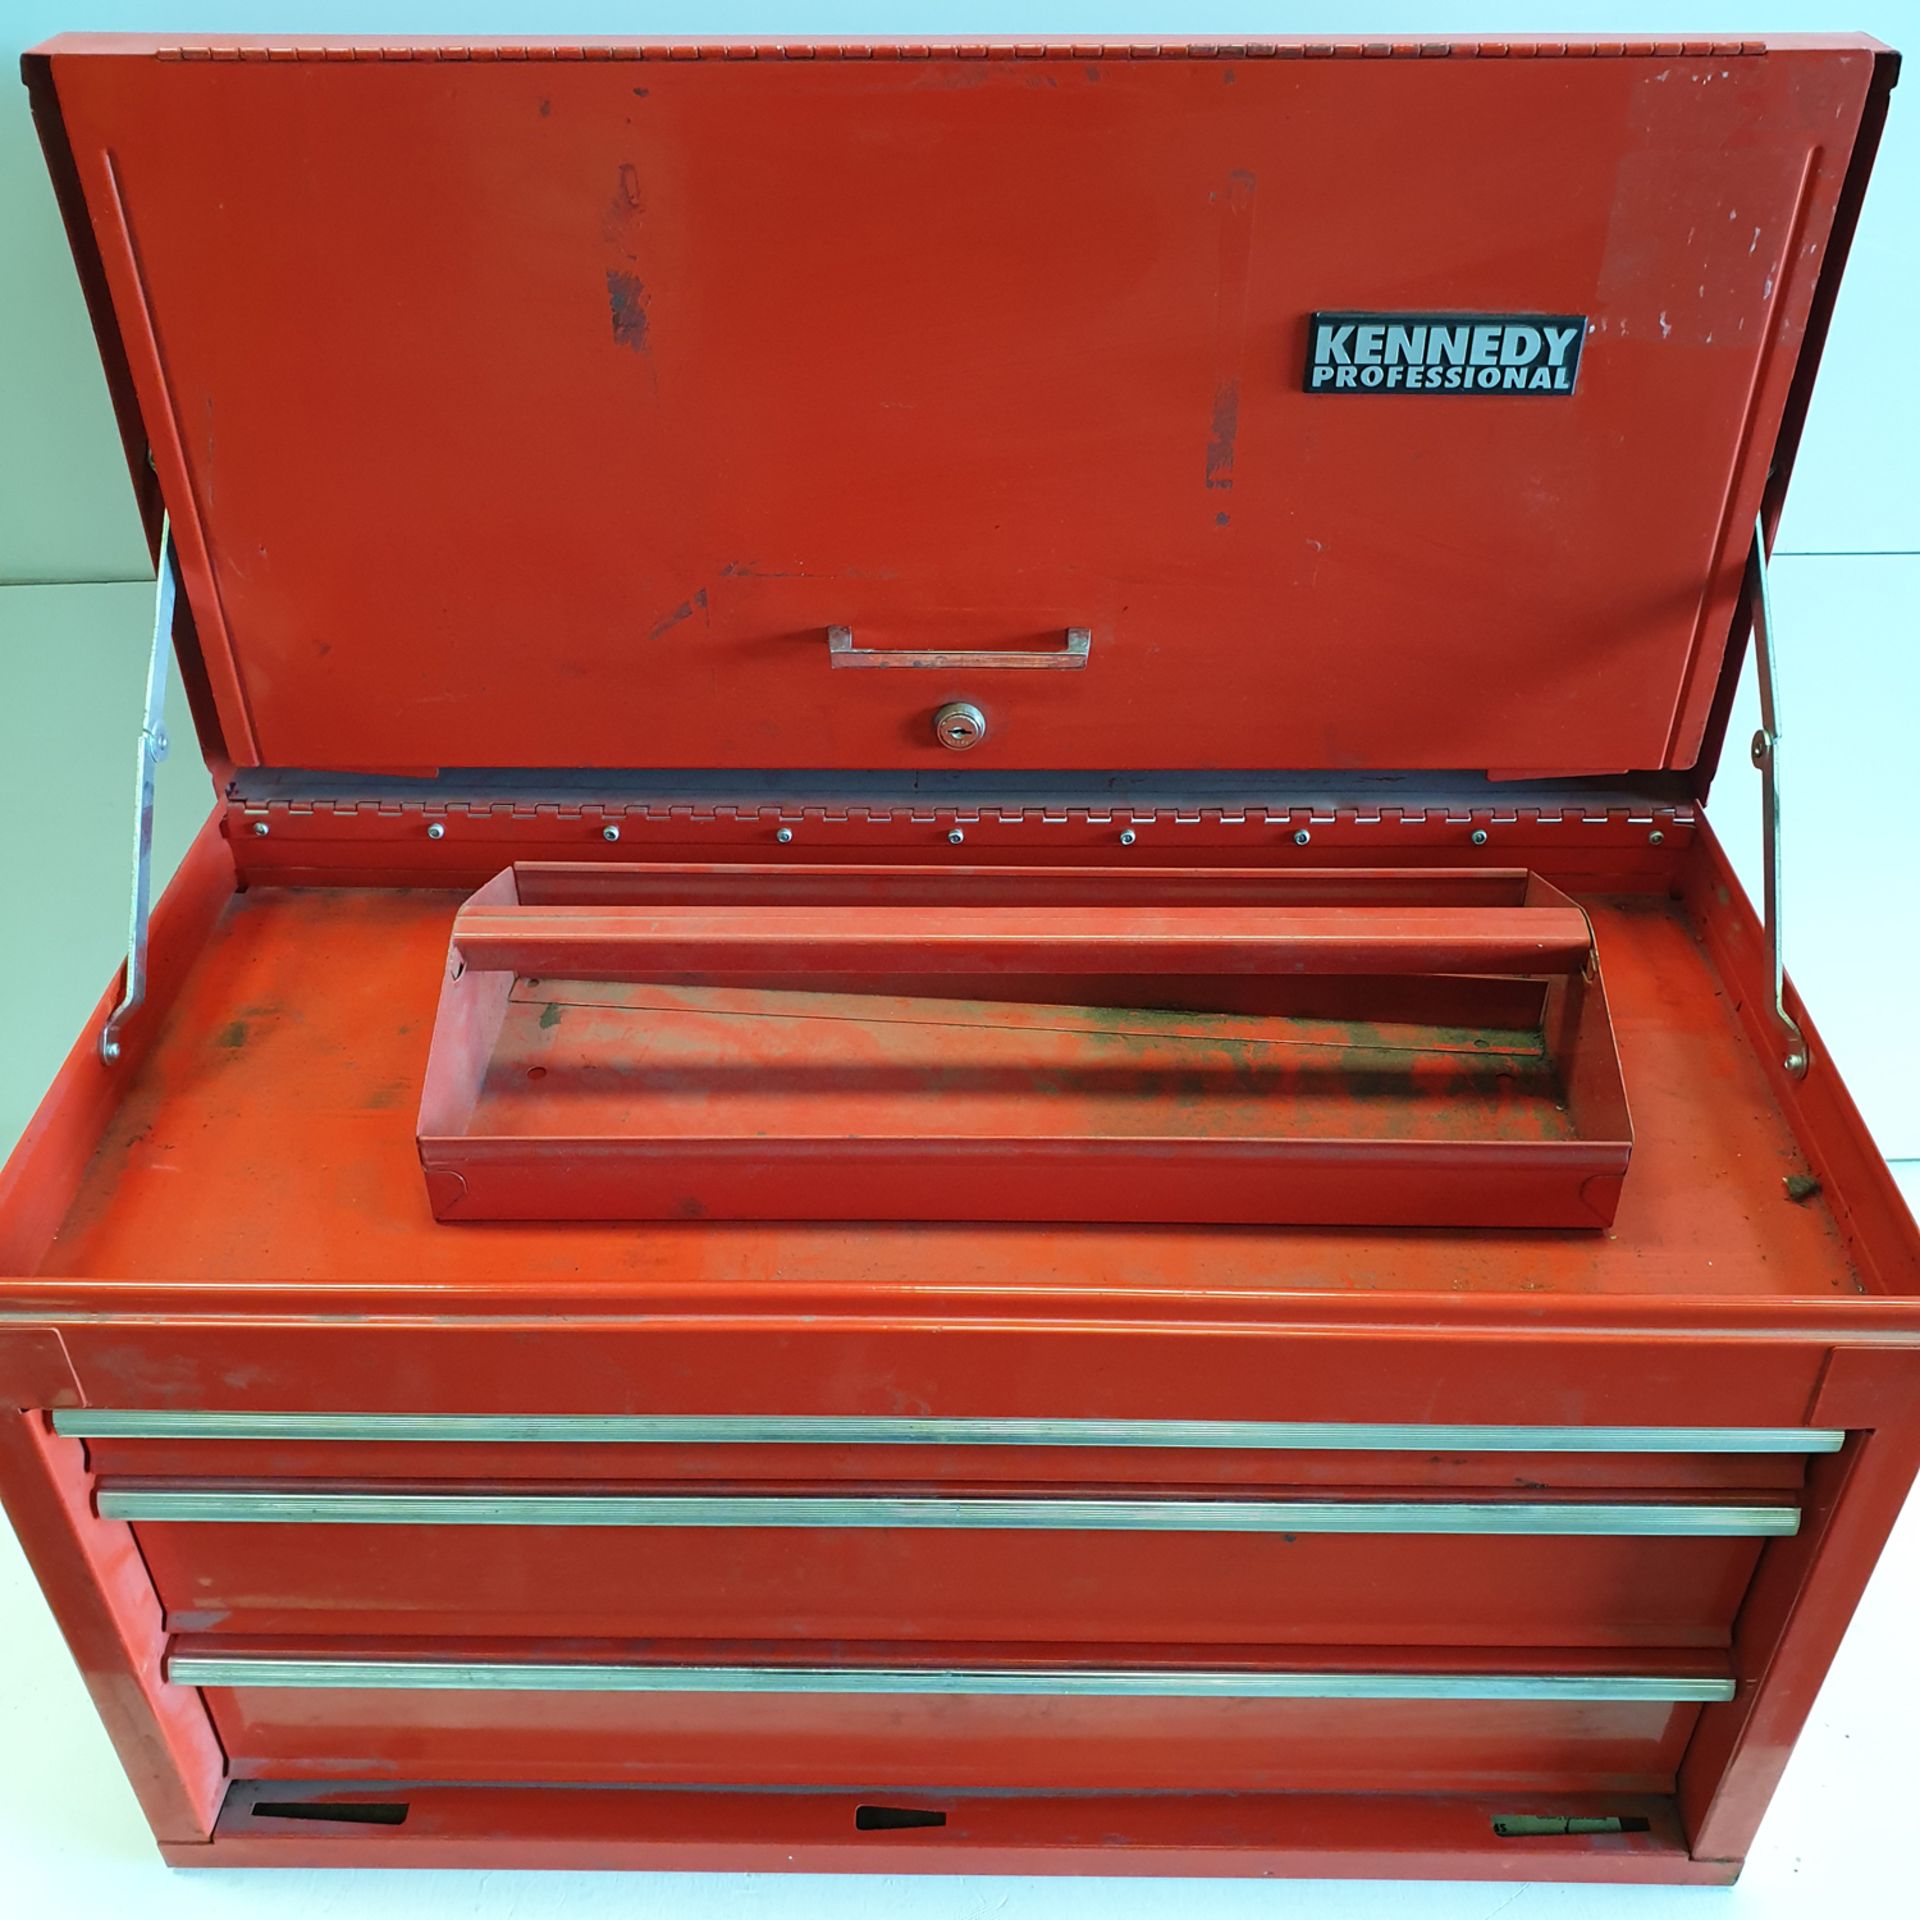 Kennedy Proffesional Steel Tool Box. Approx Dimentions 670mm x 330mm x 390mm High. - Image 3 of 7